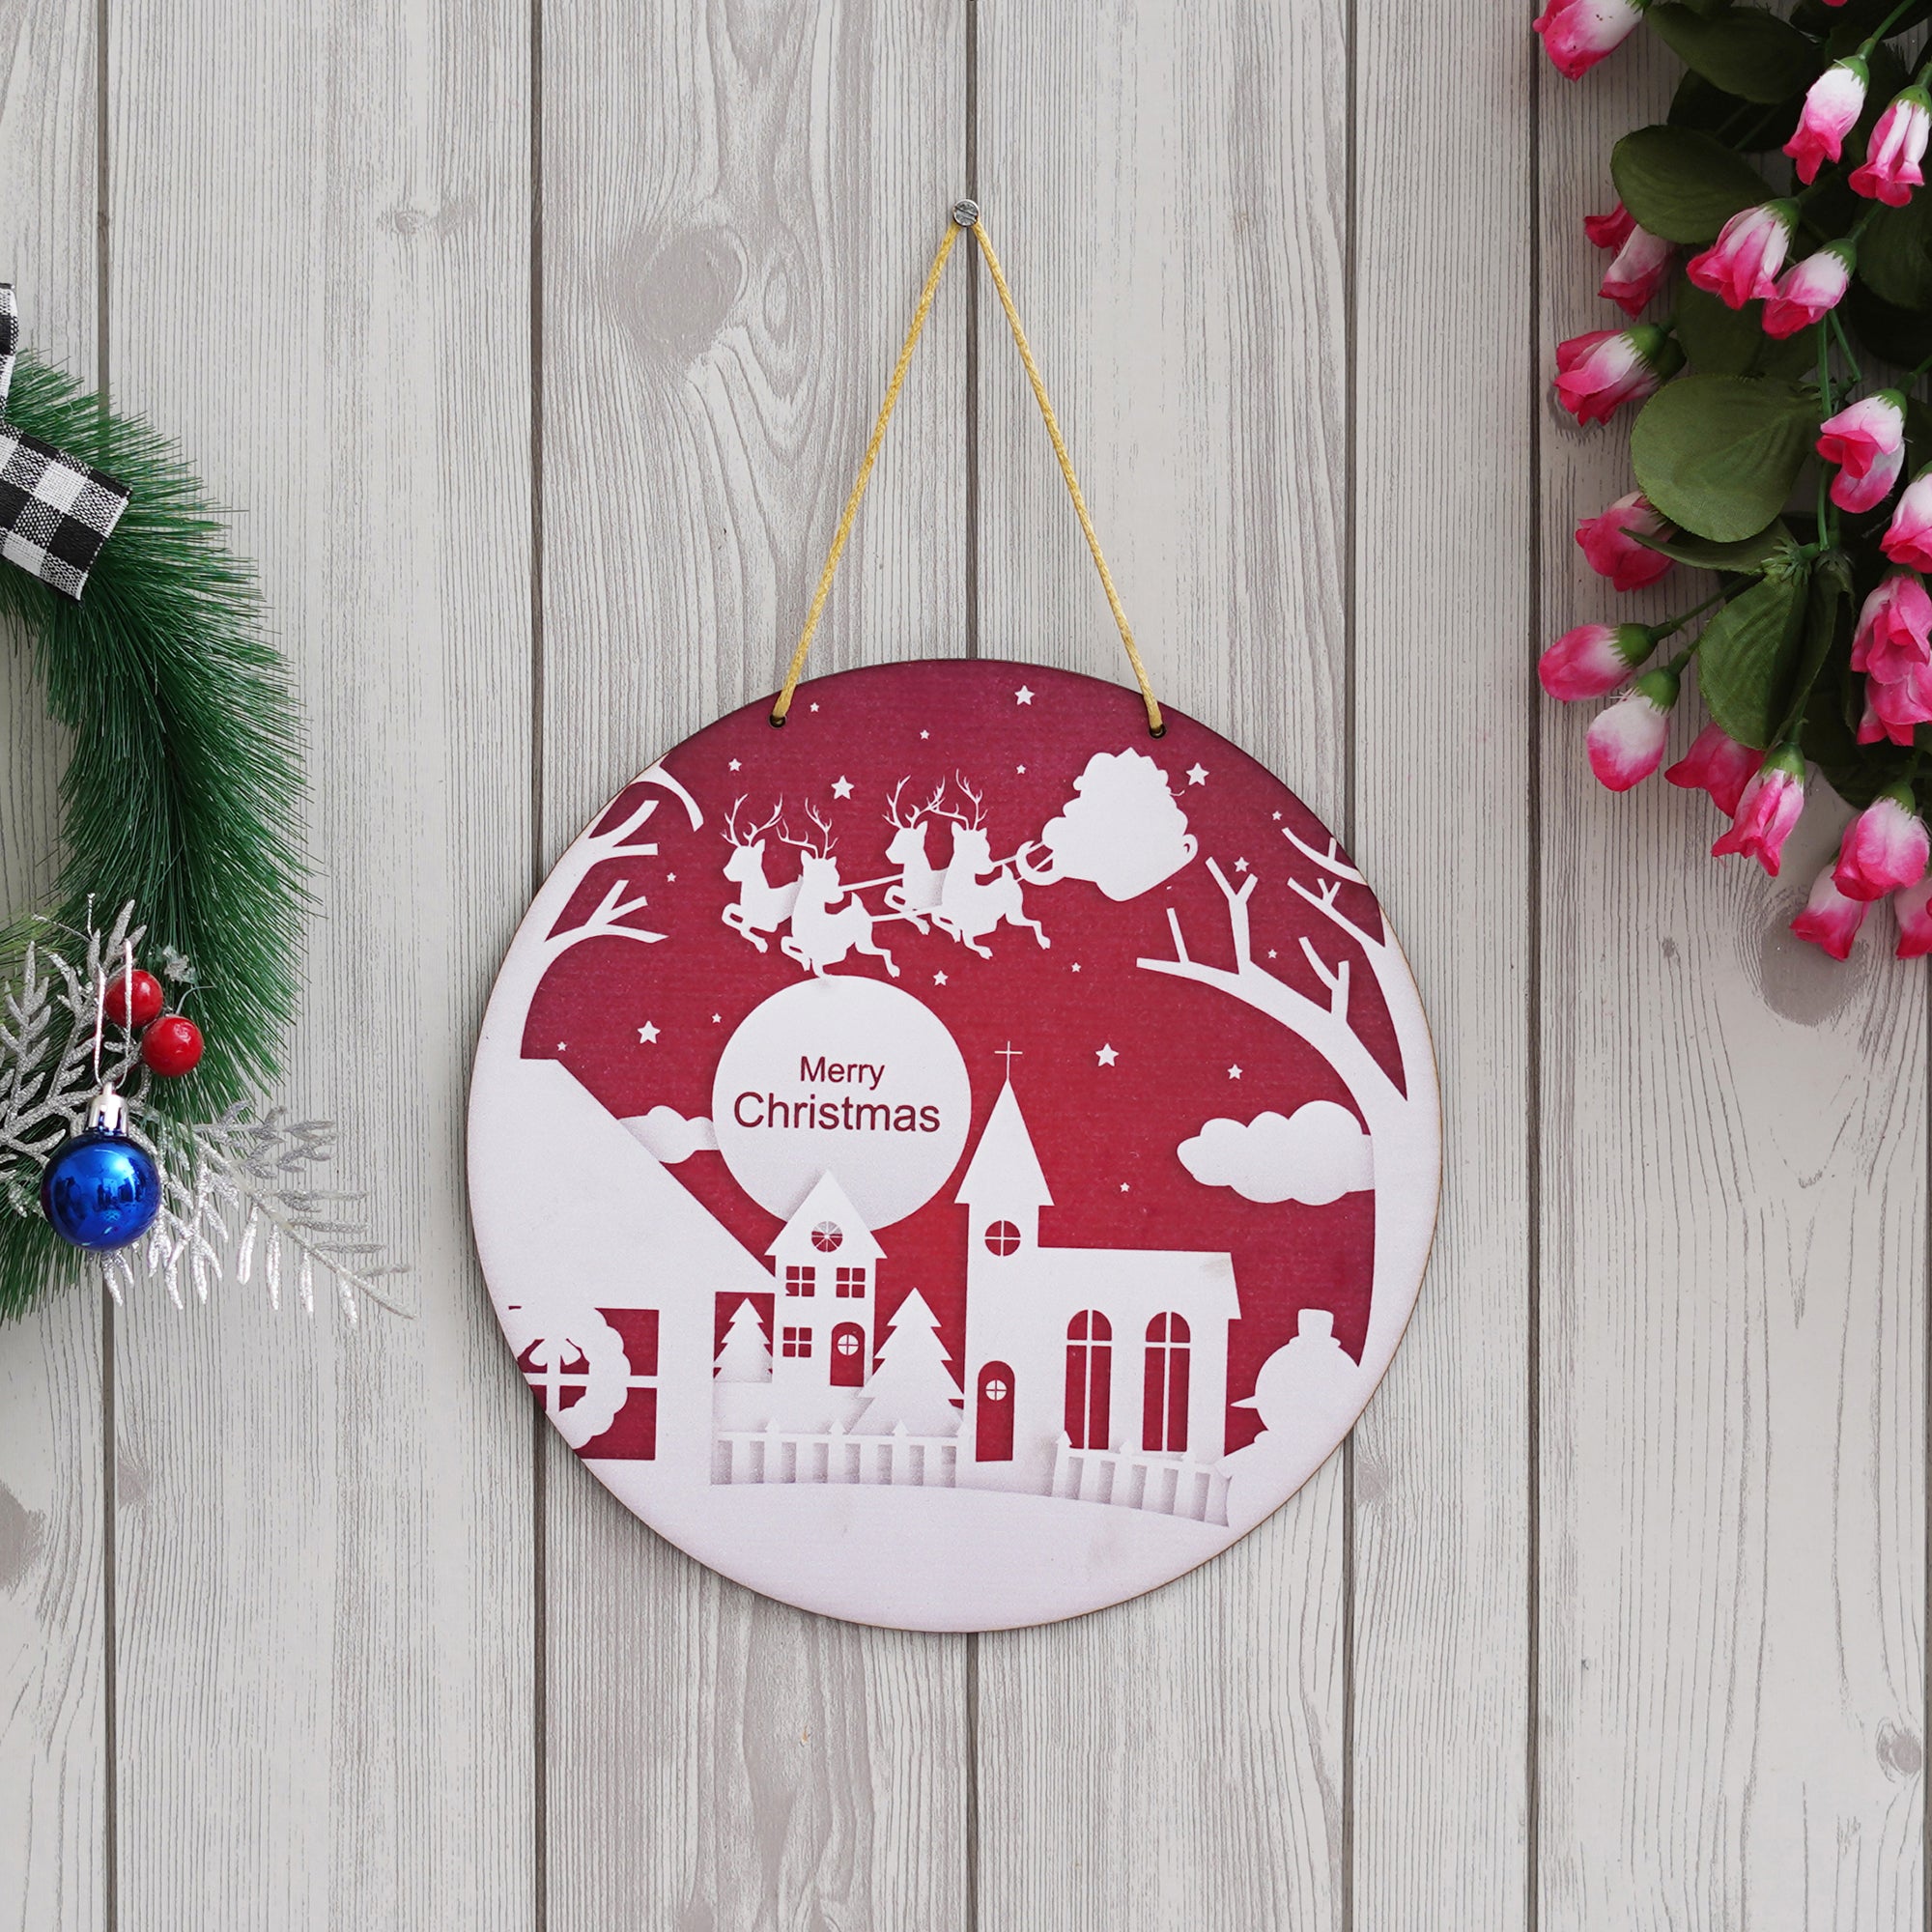 eCraftIndia Merry Christmas and Santa Claus with sleigh and reindeer Printed Door Wall Hanging for Home and Christmas Decoration (Red, White) 1